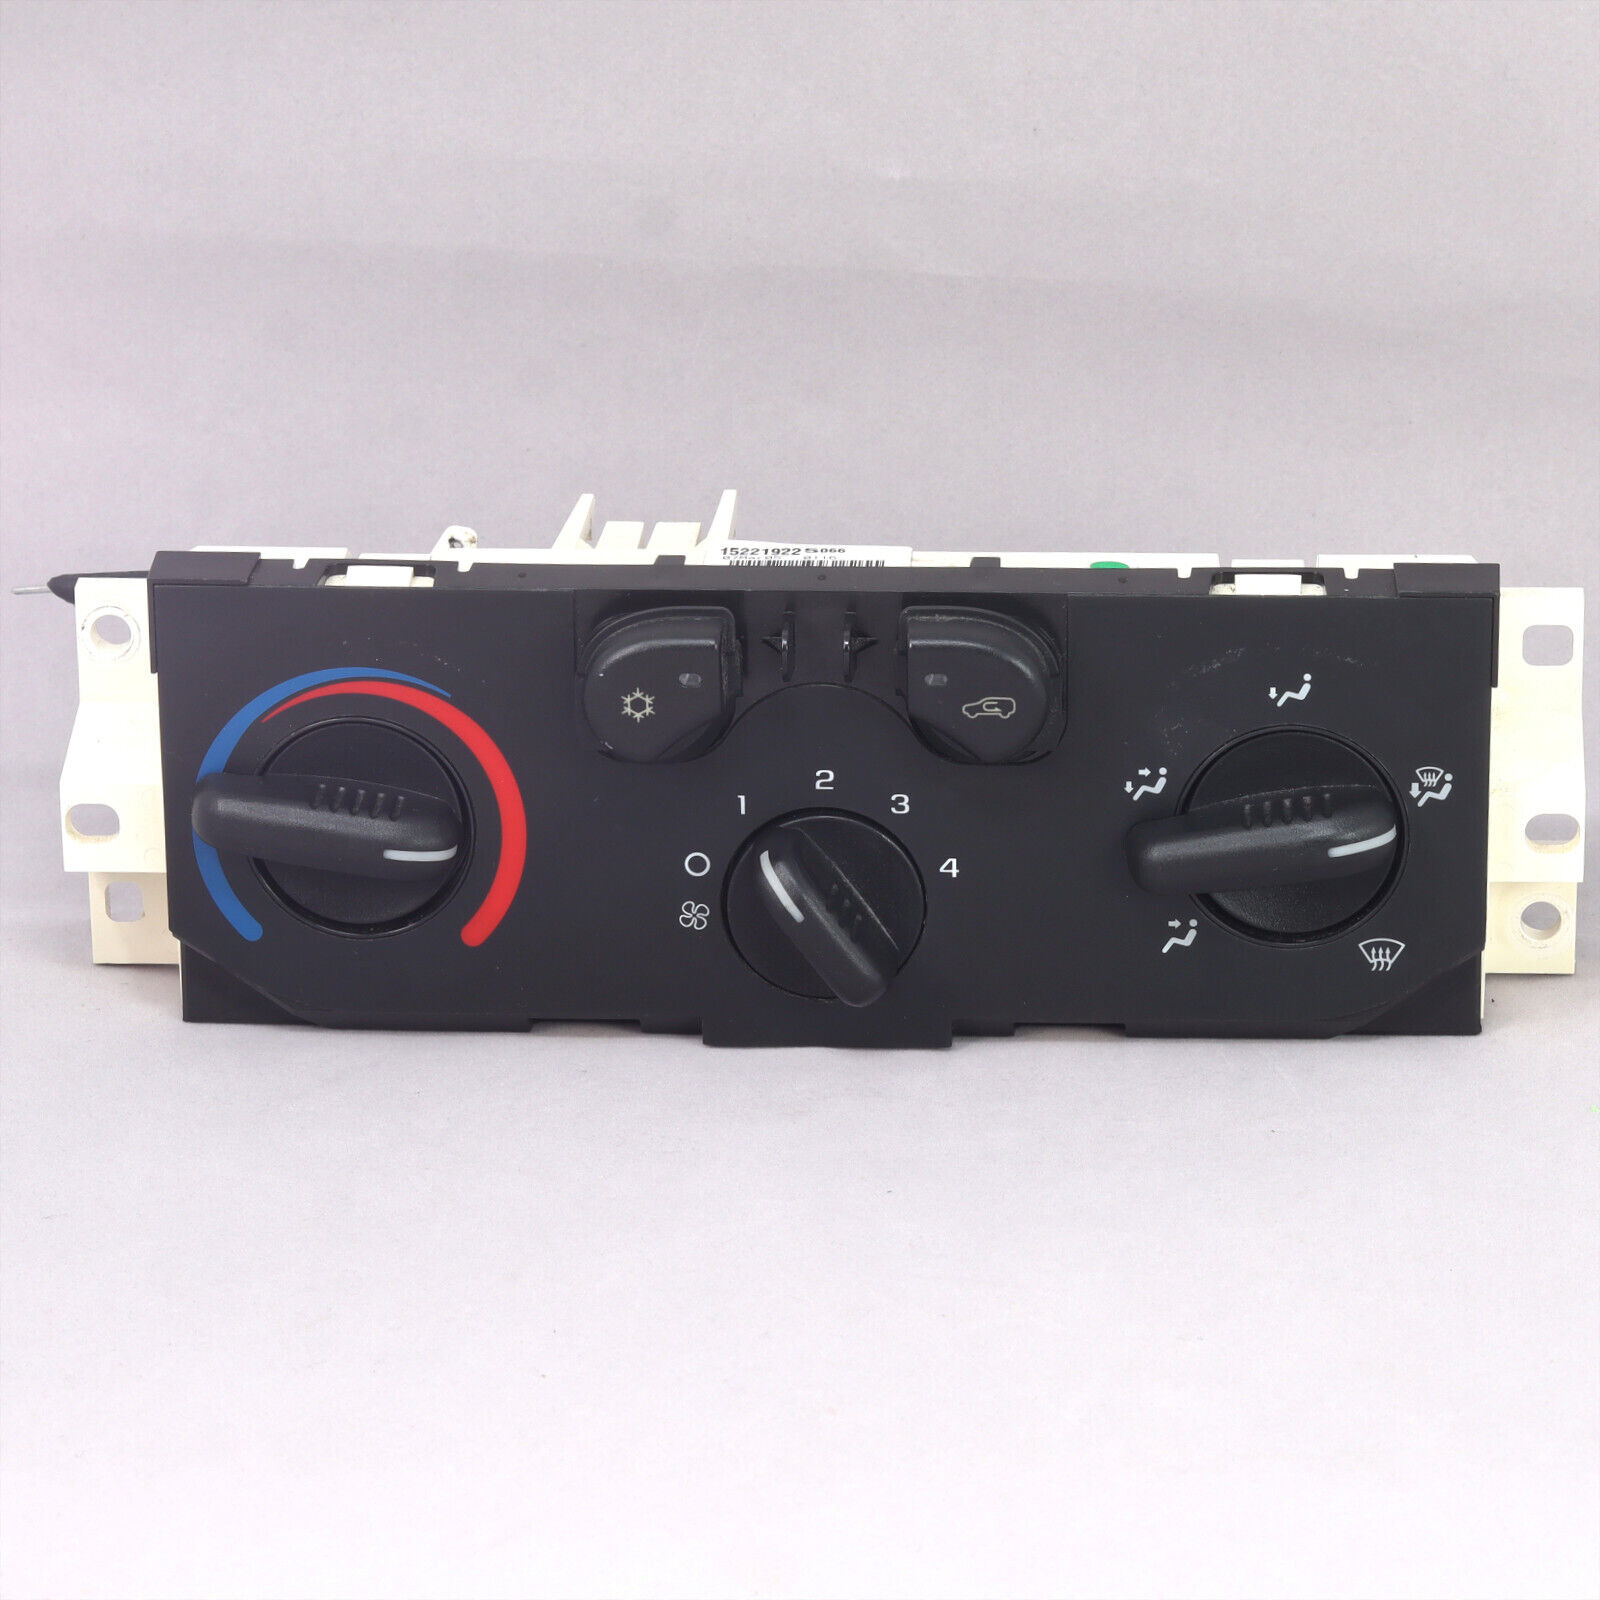 OEM AC HVAC Climate Control Switch Module Heater Dash Panel For GMC & Chevrolet